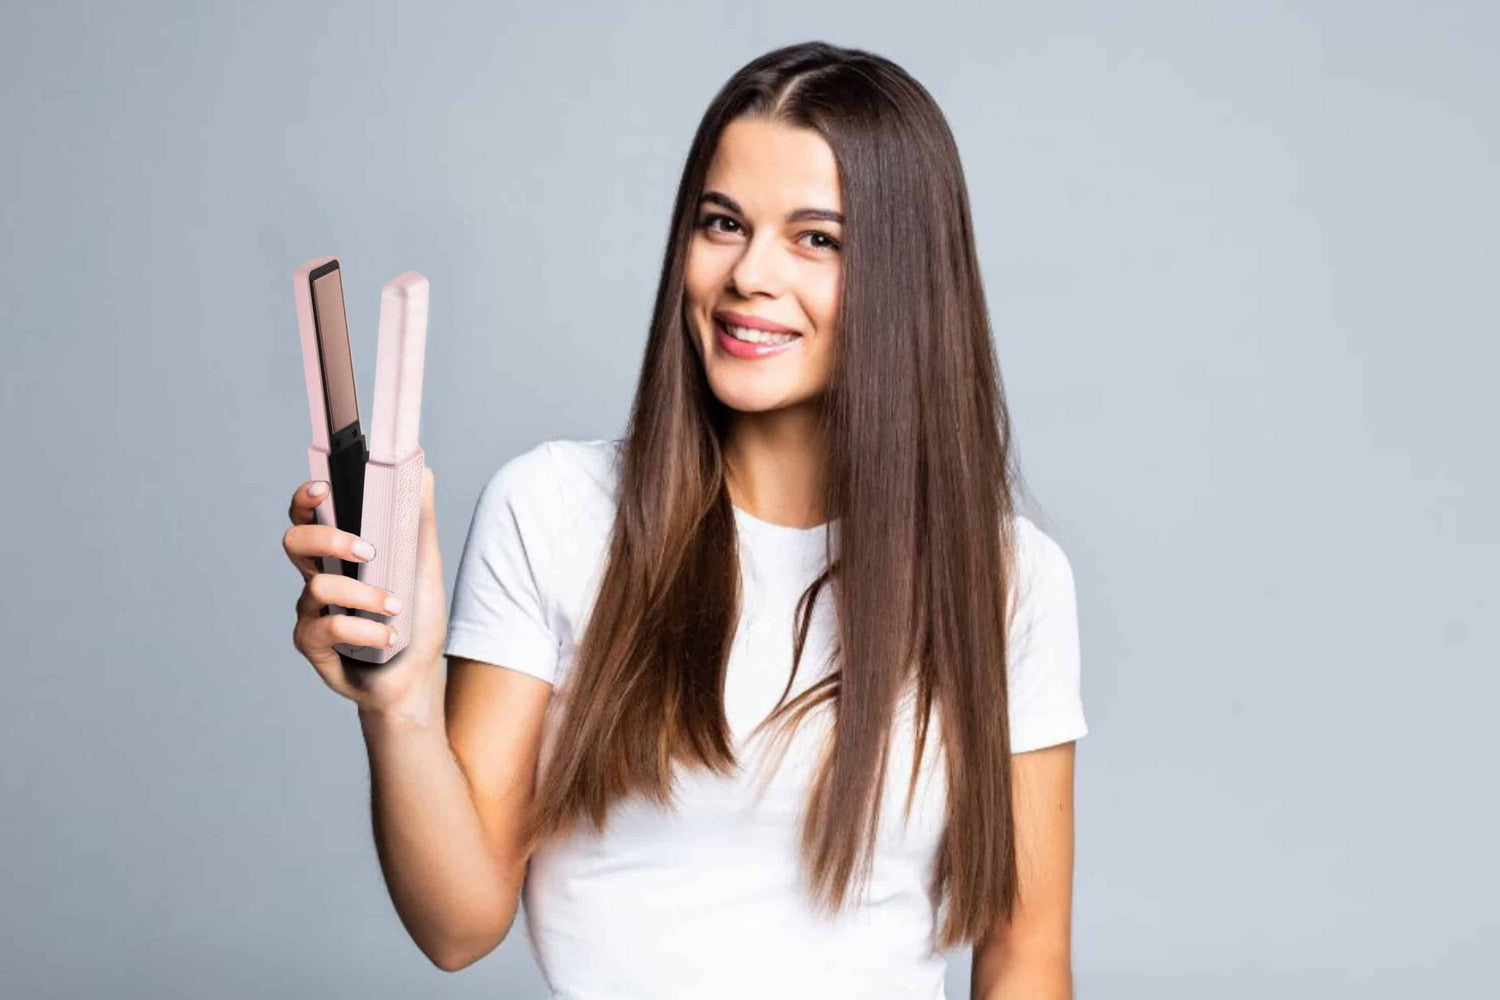 Image of woman with beautiful straight brunette hair holding and showcasing cordless Hair Straightener On-The-Go Sakura Pink color in her hand